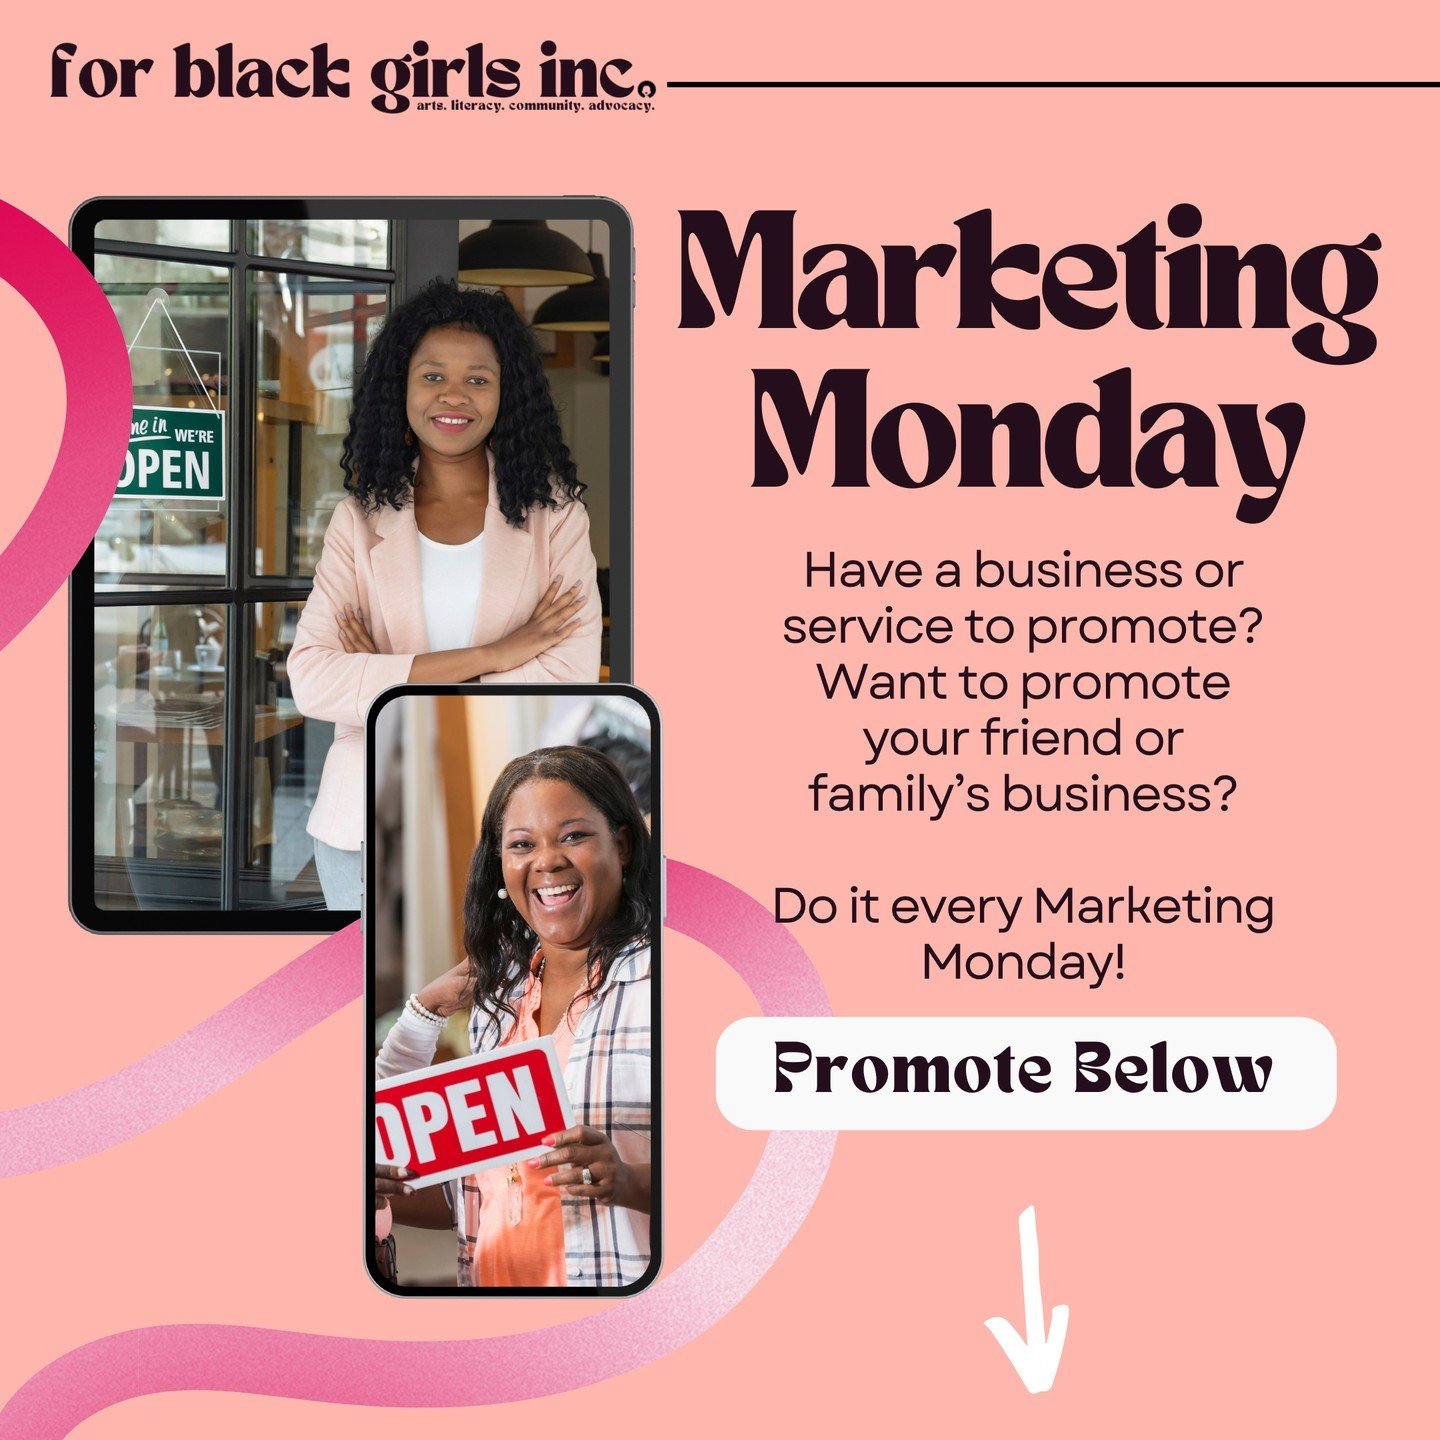 Introducing Marketing Monday with For Black Girls! Whether you have a business to promote or want to support a friend or family member's business, Marketing Monday is the perfect opportunity to showcase your products and services. Join us every Monda